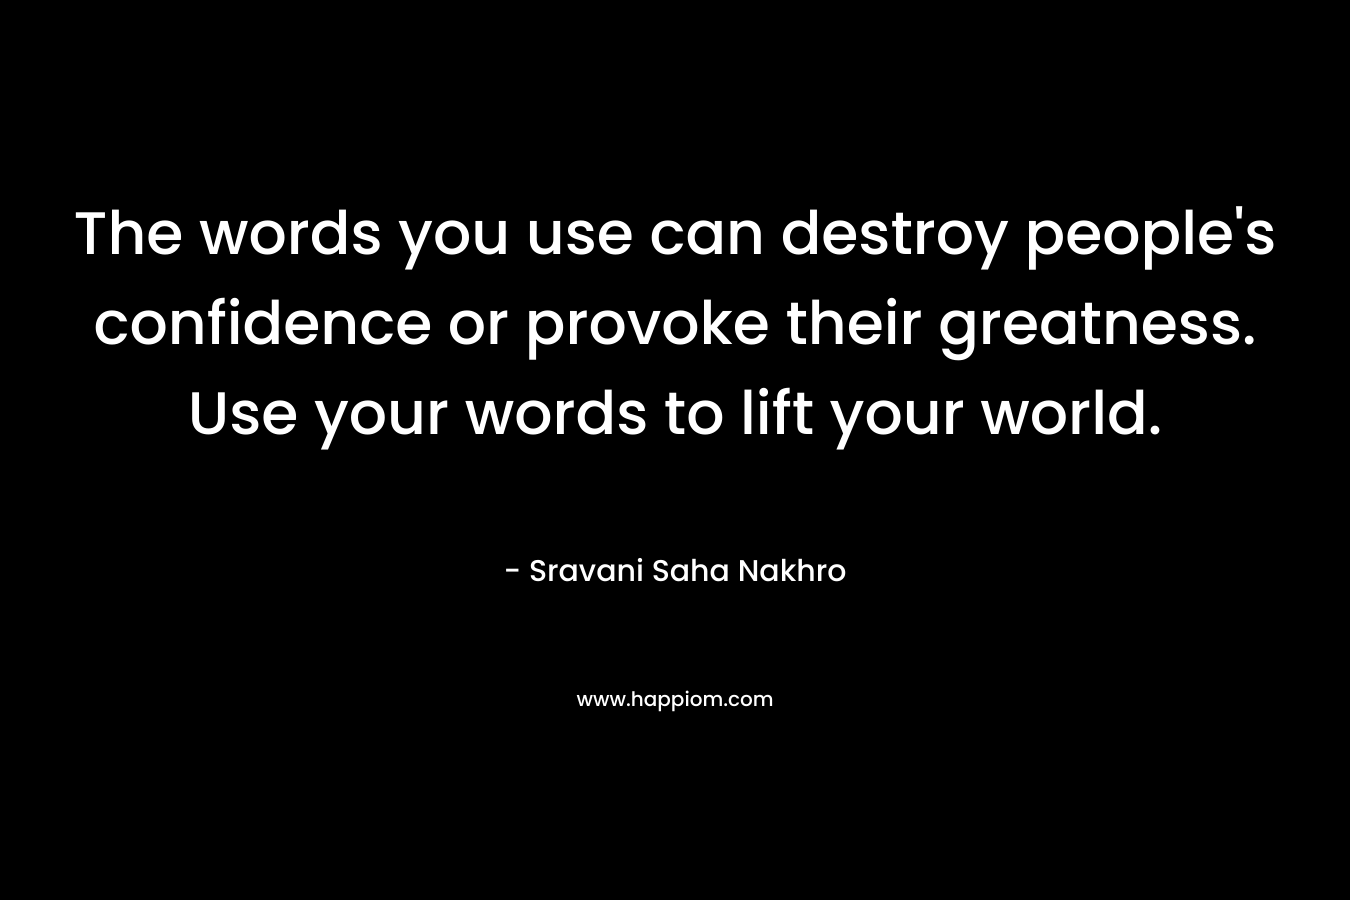 The words you use can destroy people’s confidence or provoke their greatness. Use your words to lift your world. – Sravani Saha Nakhro